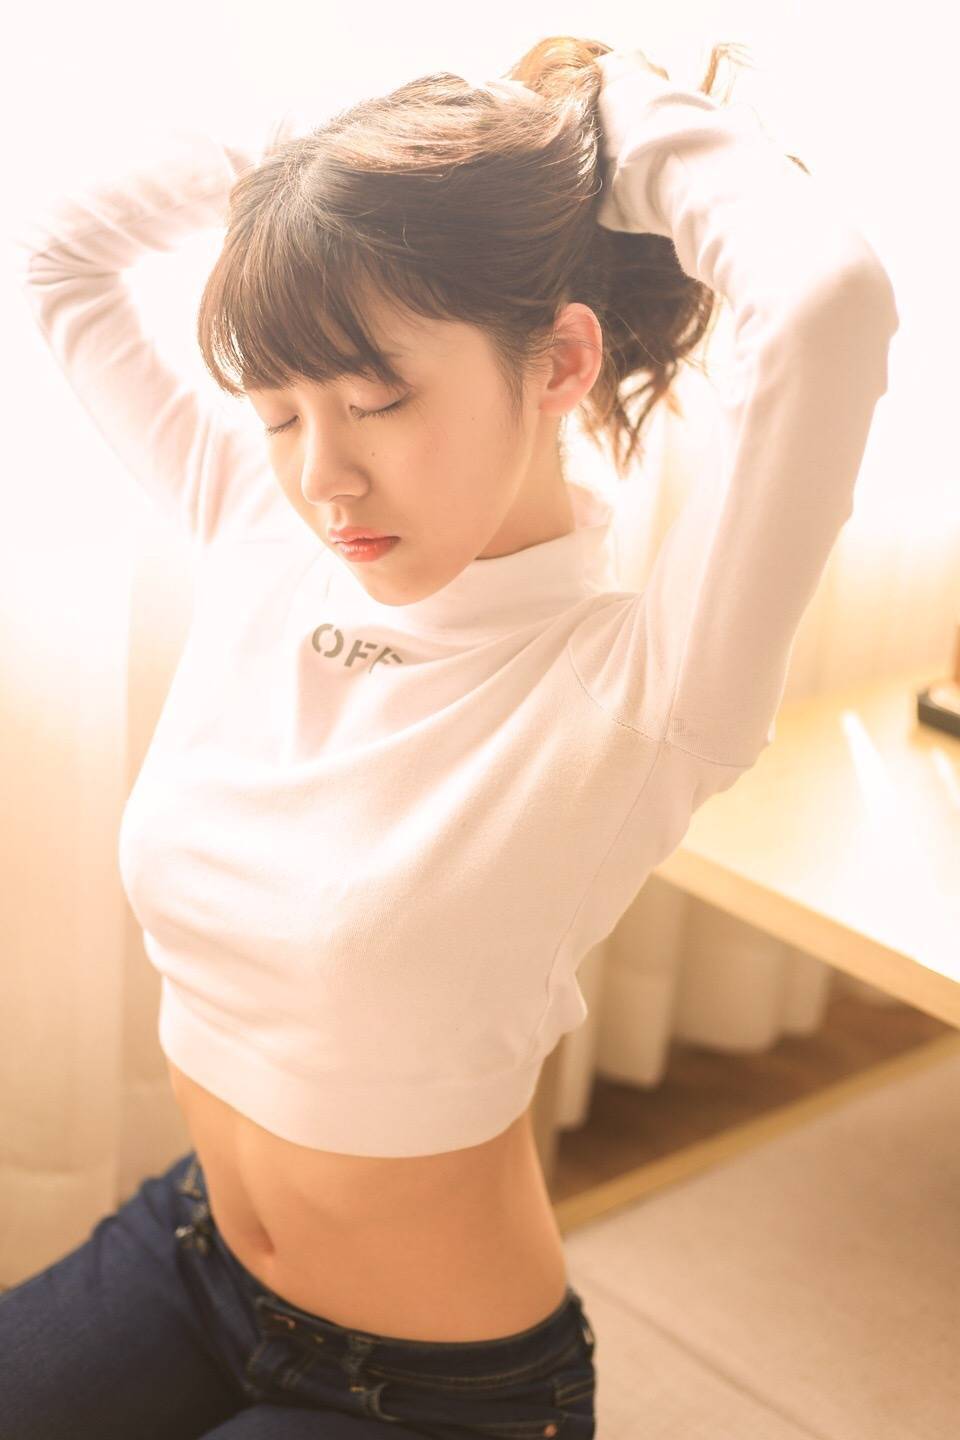 Meiyun Lai Sexy and Hottest Photos , Latest Pics